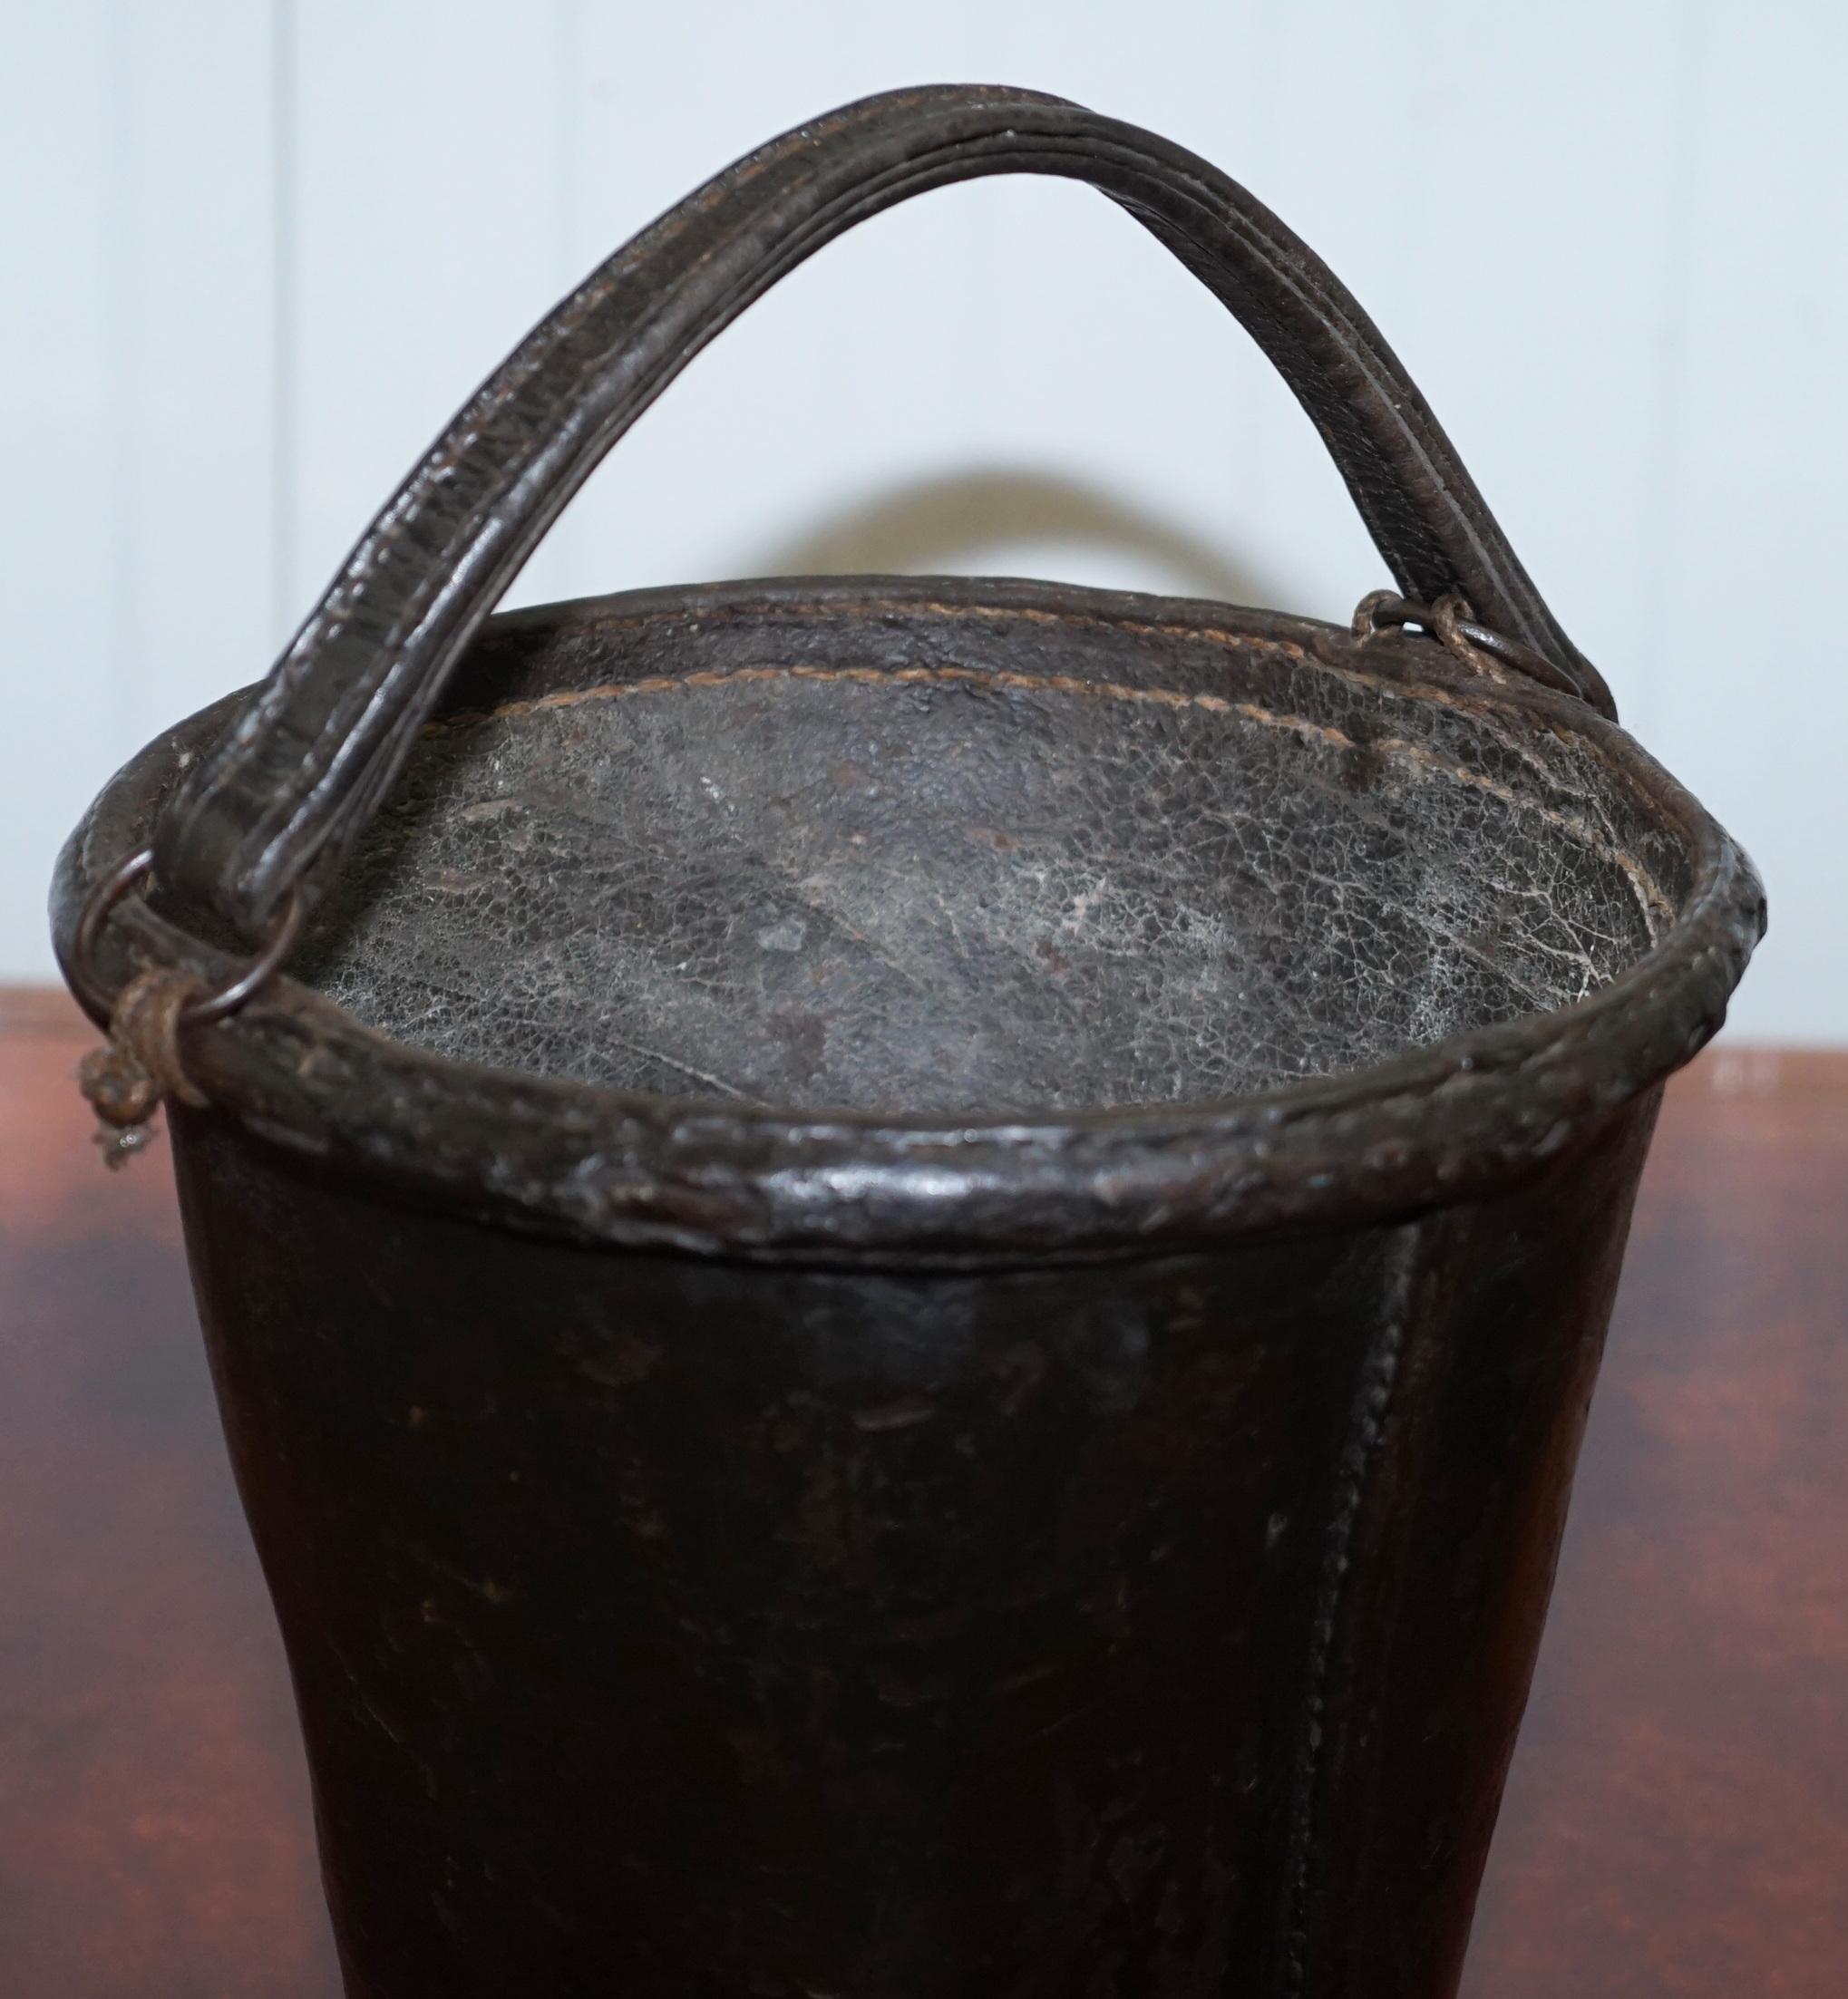 We are delighted to offer for sale this stunning original circa 1800 iron and leather bound fire bucket with original handle

I have another which is early 18th century listed under my other items

A very decorative and well made piece, well